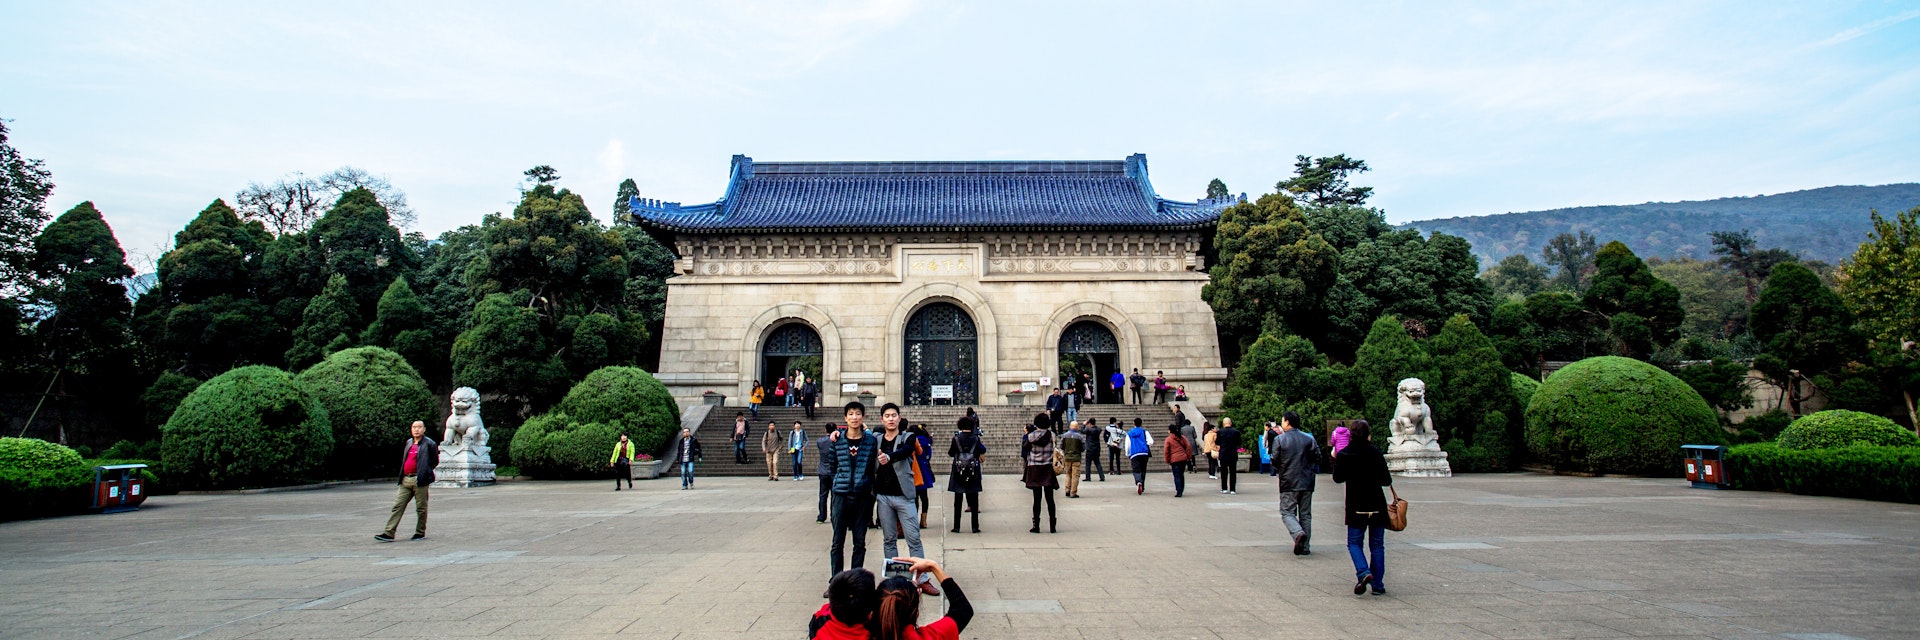 NANJING, CHINA - 2014/11/12: Tourists take photos in front of Dr. Sun Yat-sen's Mausoleum. Sun's Mausoleum situated at the foot of Mount Zijin in Nanjing,  Sun is considered to be the "Father of Modern China" both in mainland China and Taiwan, as well as the founder of Republic of China.  As the Holy land of Chinese people both home and abroad, Dr. Sun Yat-sen's Mausoleum attracts a lot of visitors every year. (Photo by Zhang Peng/LightRocket via Getty Images)